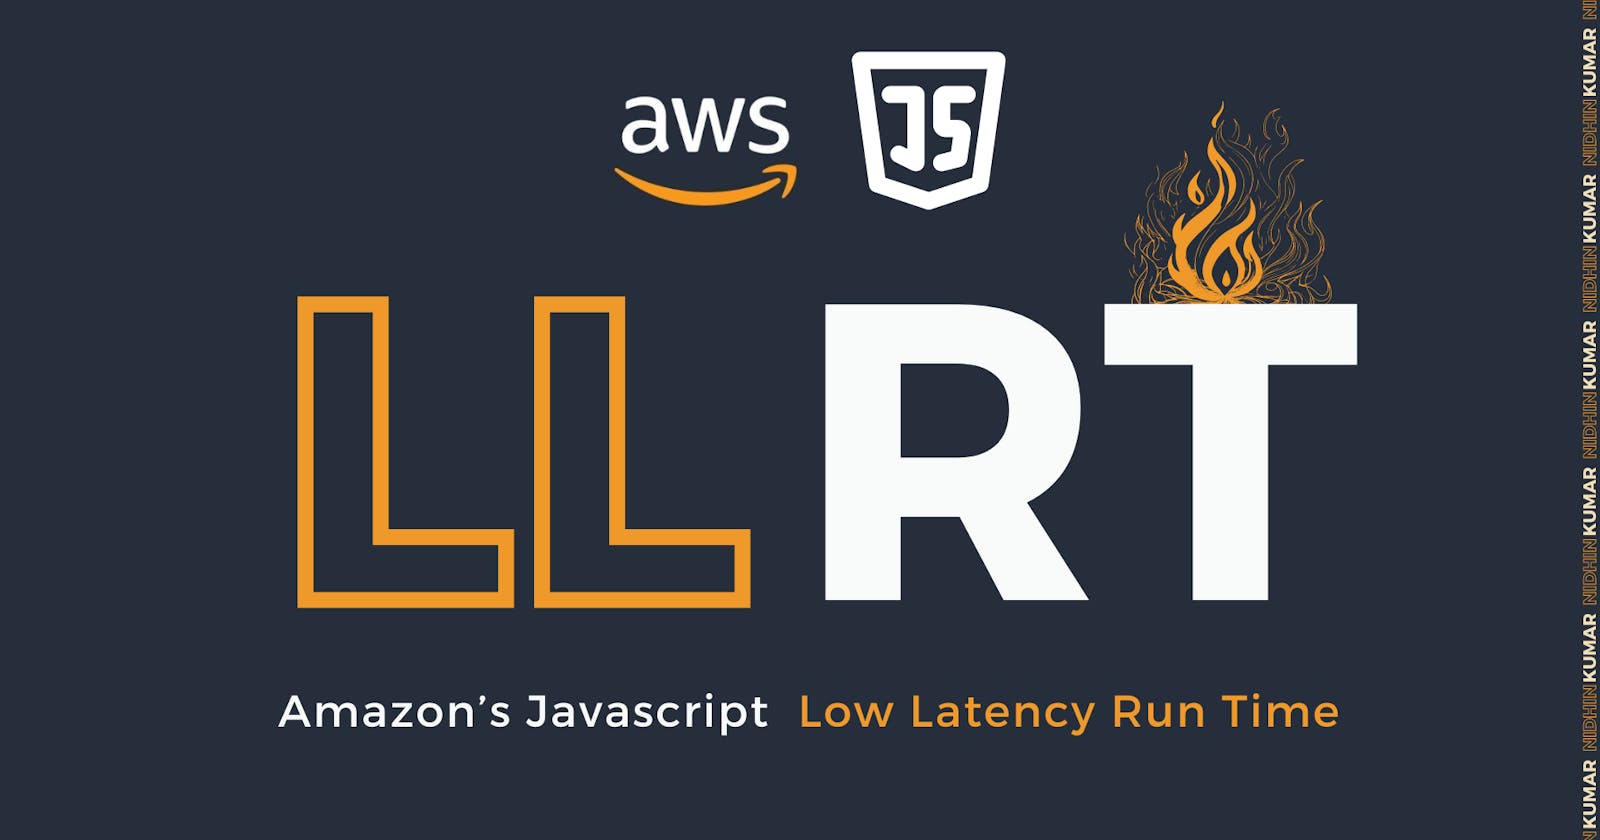 LLRT: Amazon's Low Latency RunTime for  JavaScript Environments.